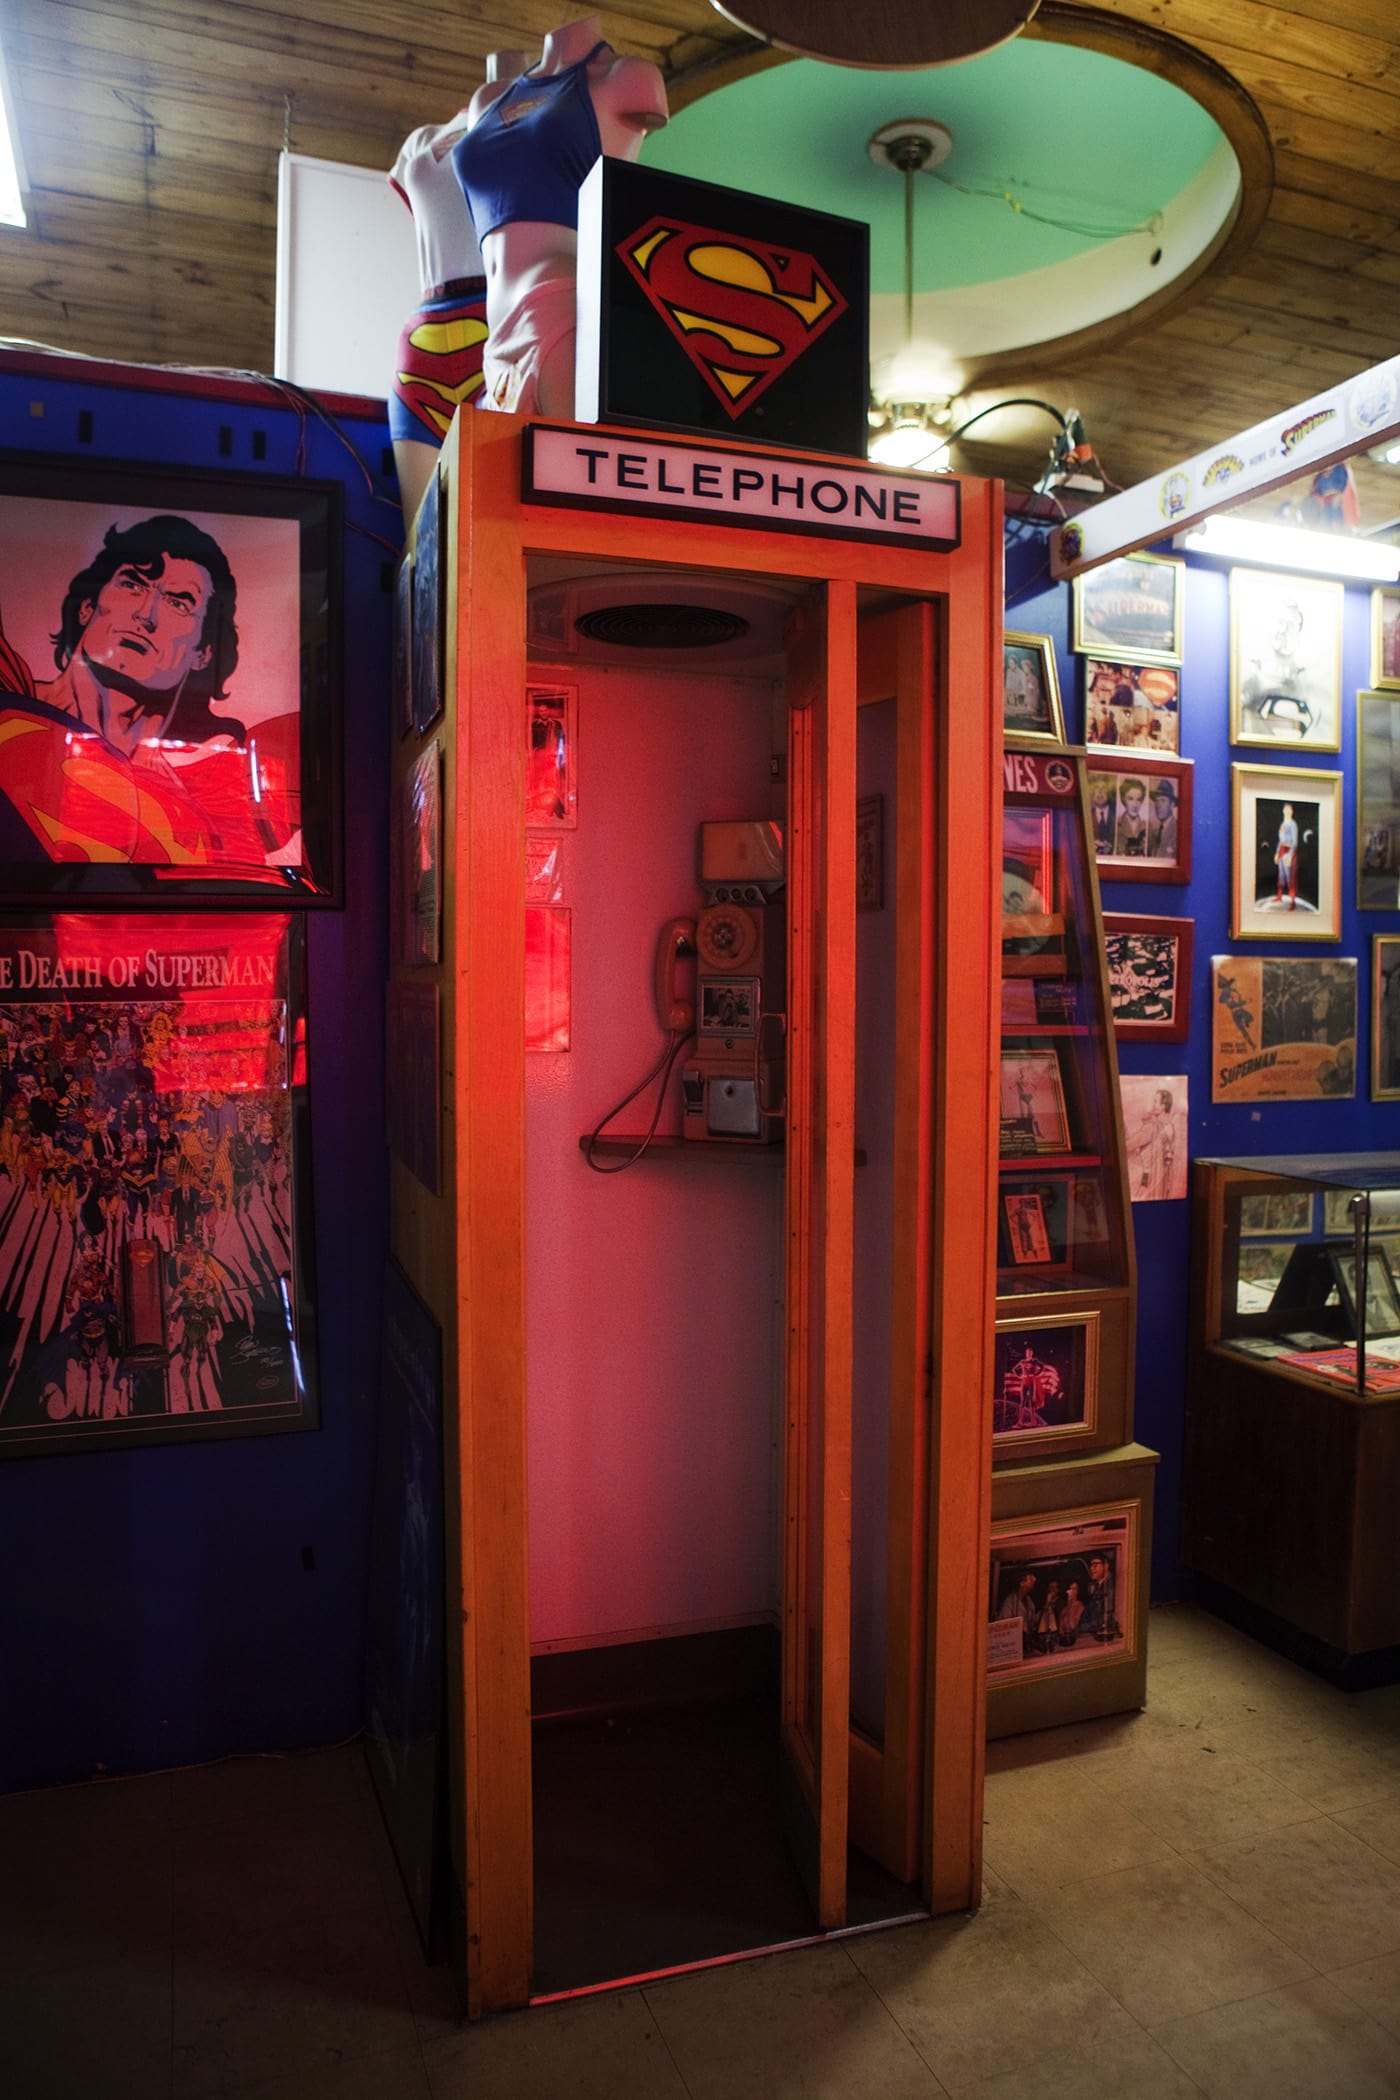 Superman telephone booth at the Super Museum in Metropolis, Illinois.